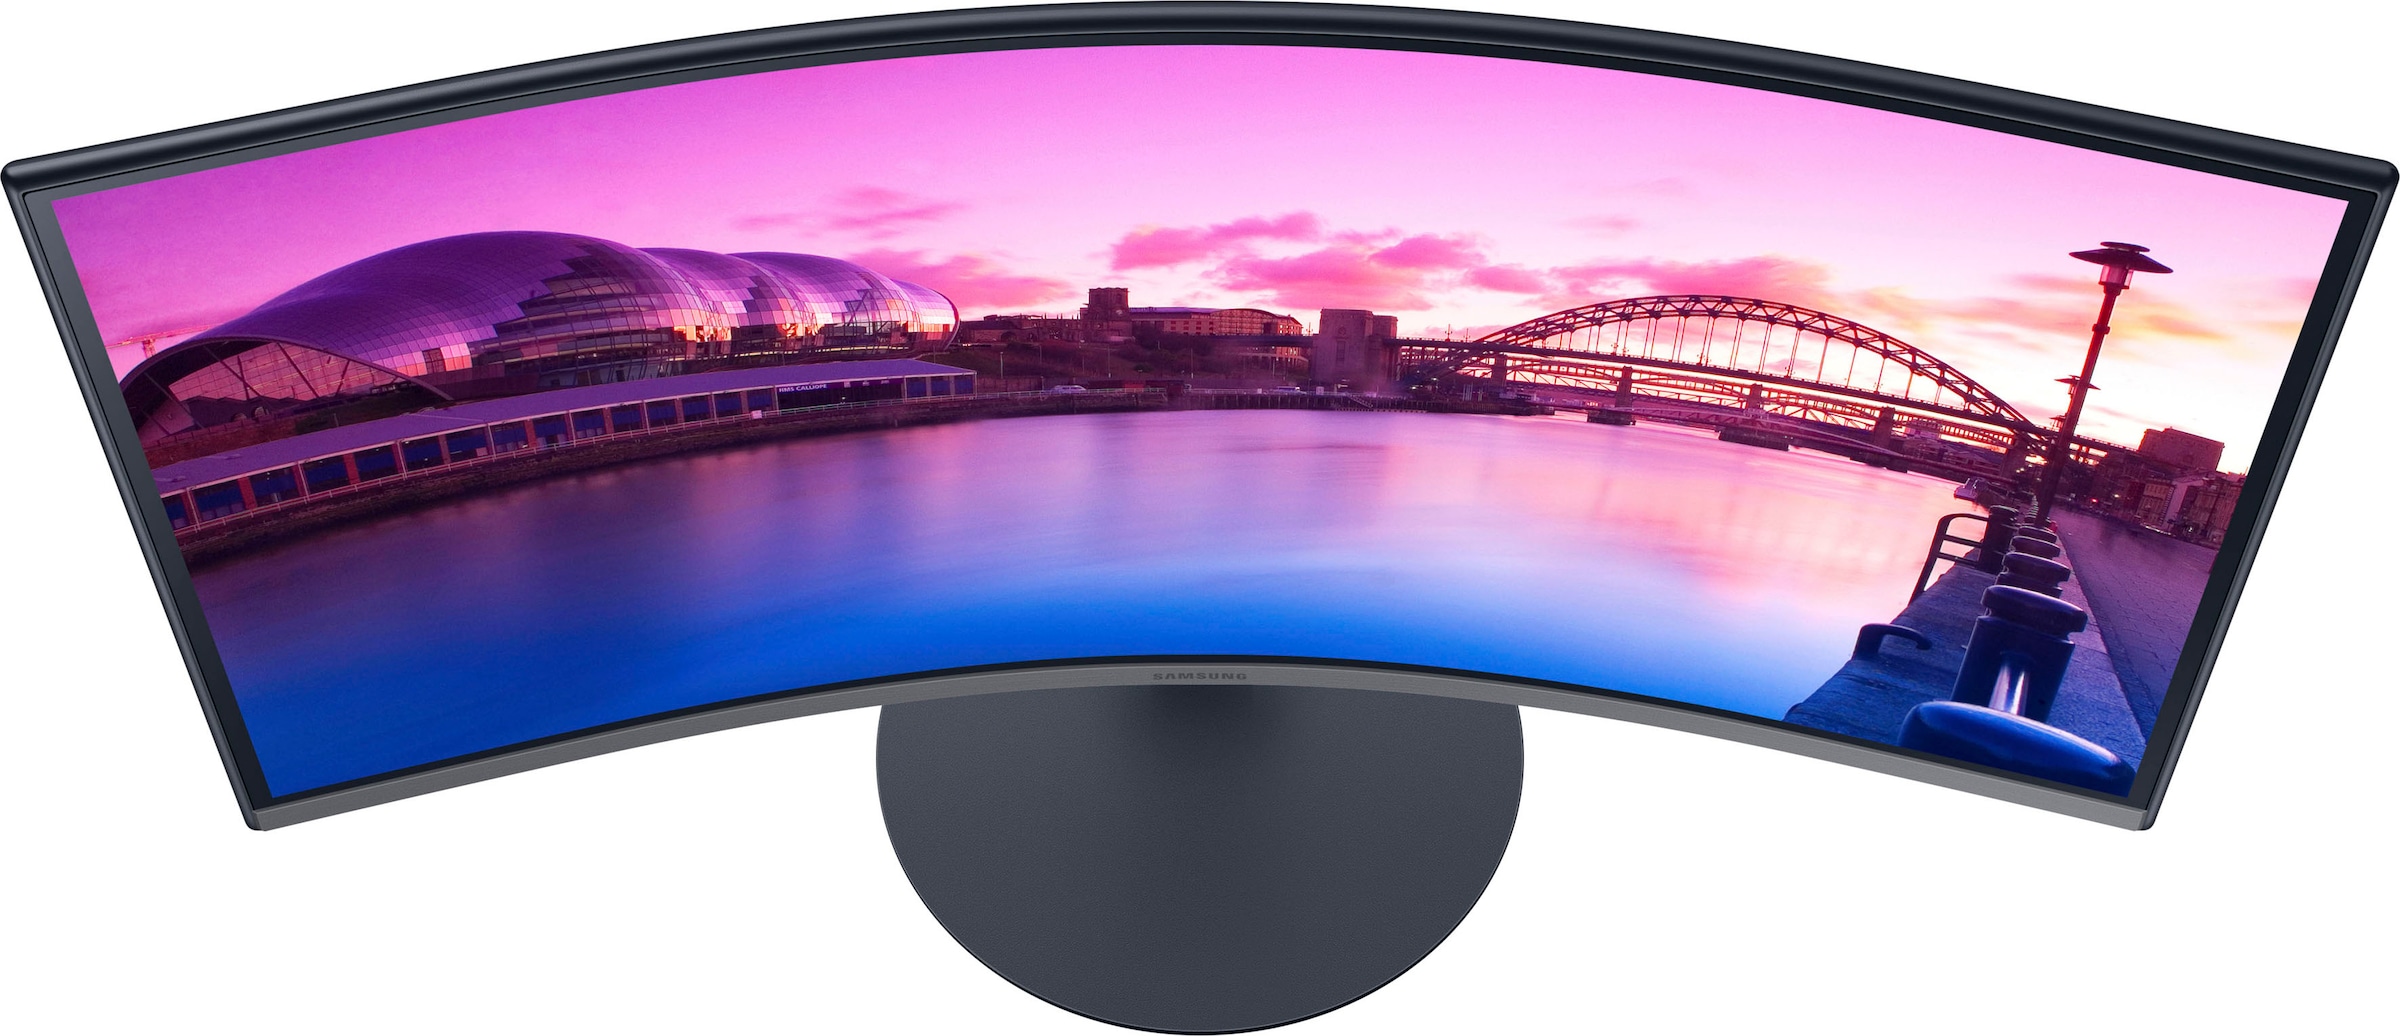 bei cm/27 68,6 75 online 1920 x »S27C390EAU«, HD, Zoll, px, Full Hz ms 4 OTTO Samsung 1080 Reaktionszeit, Curved-LED-Monitor